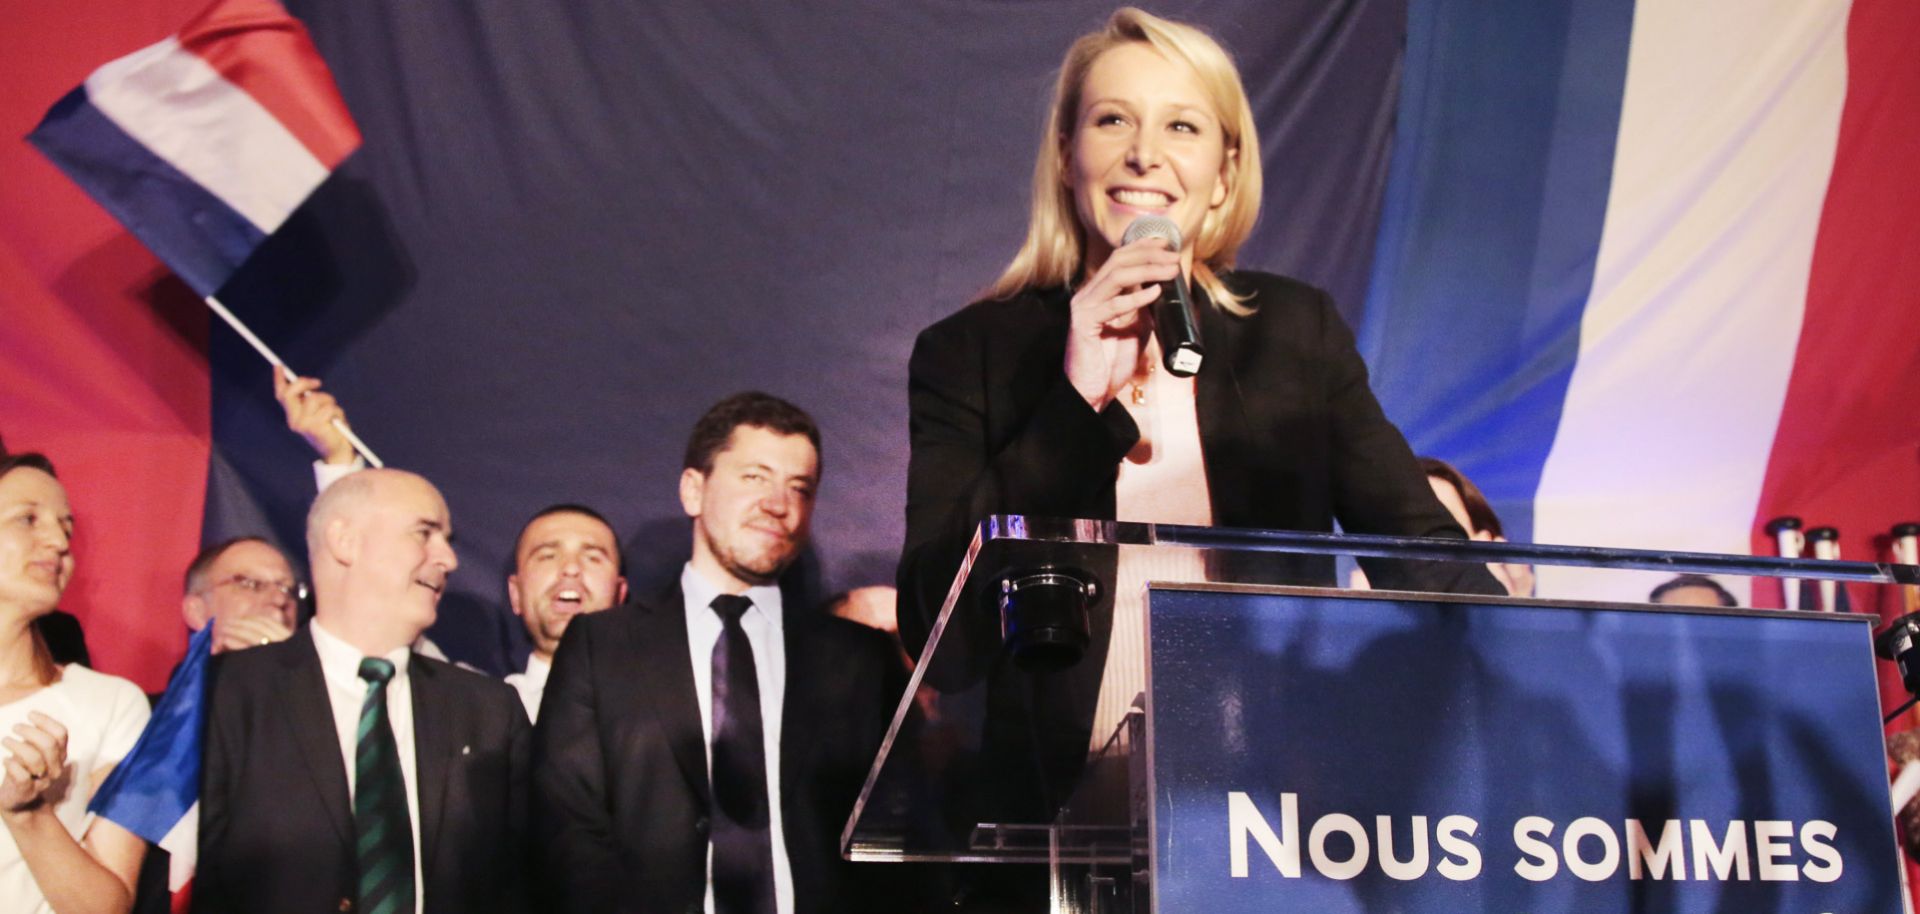 Marion Marechal-Le Pen, National Front candidate for the regional elections in Provence-Alpes-Cote d'Azur, speaks to supporters on Dec. 6 in Avignon, France.